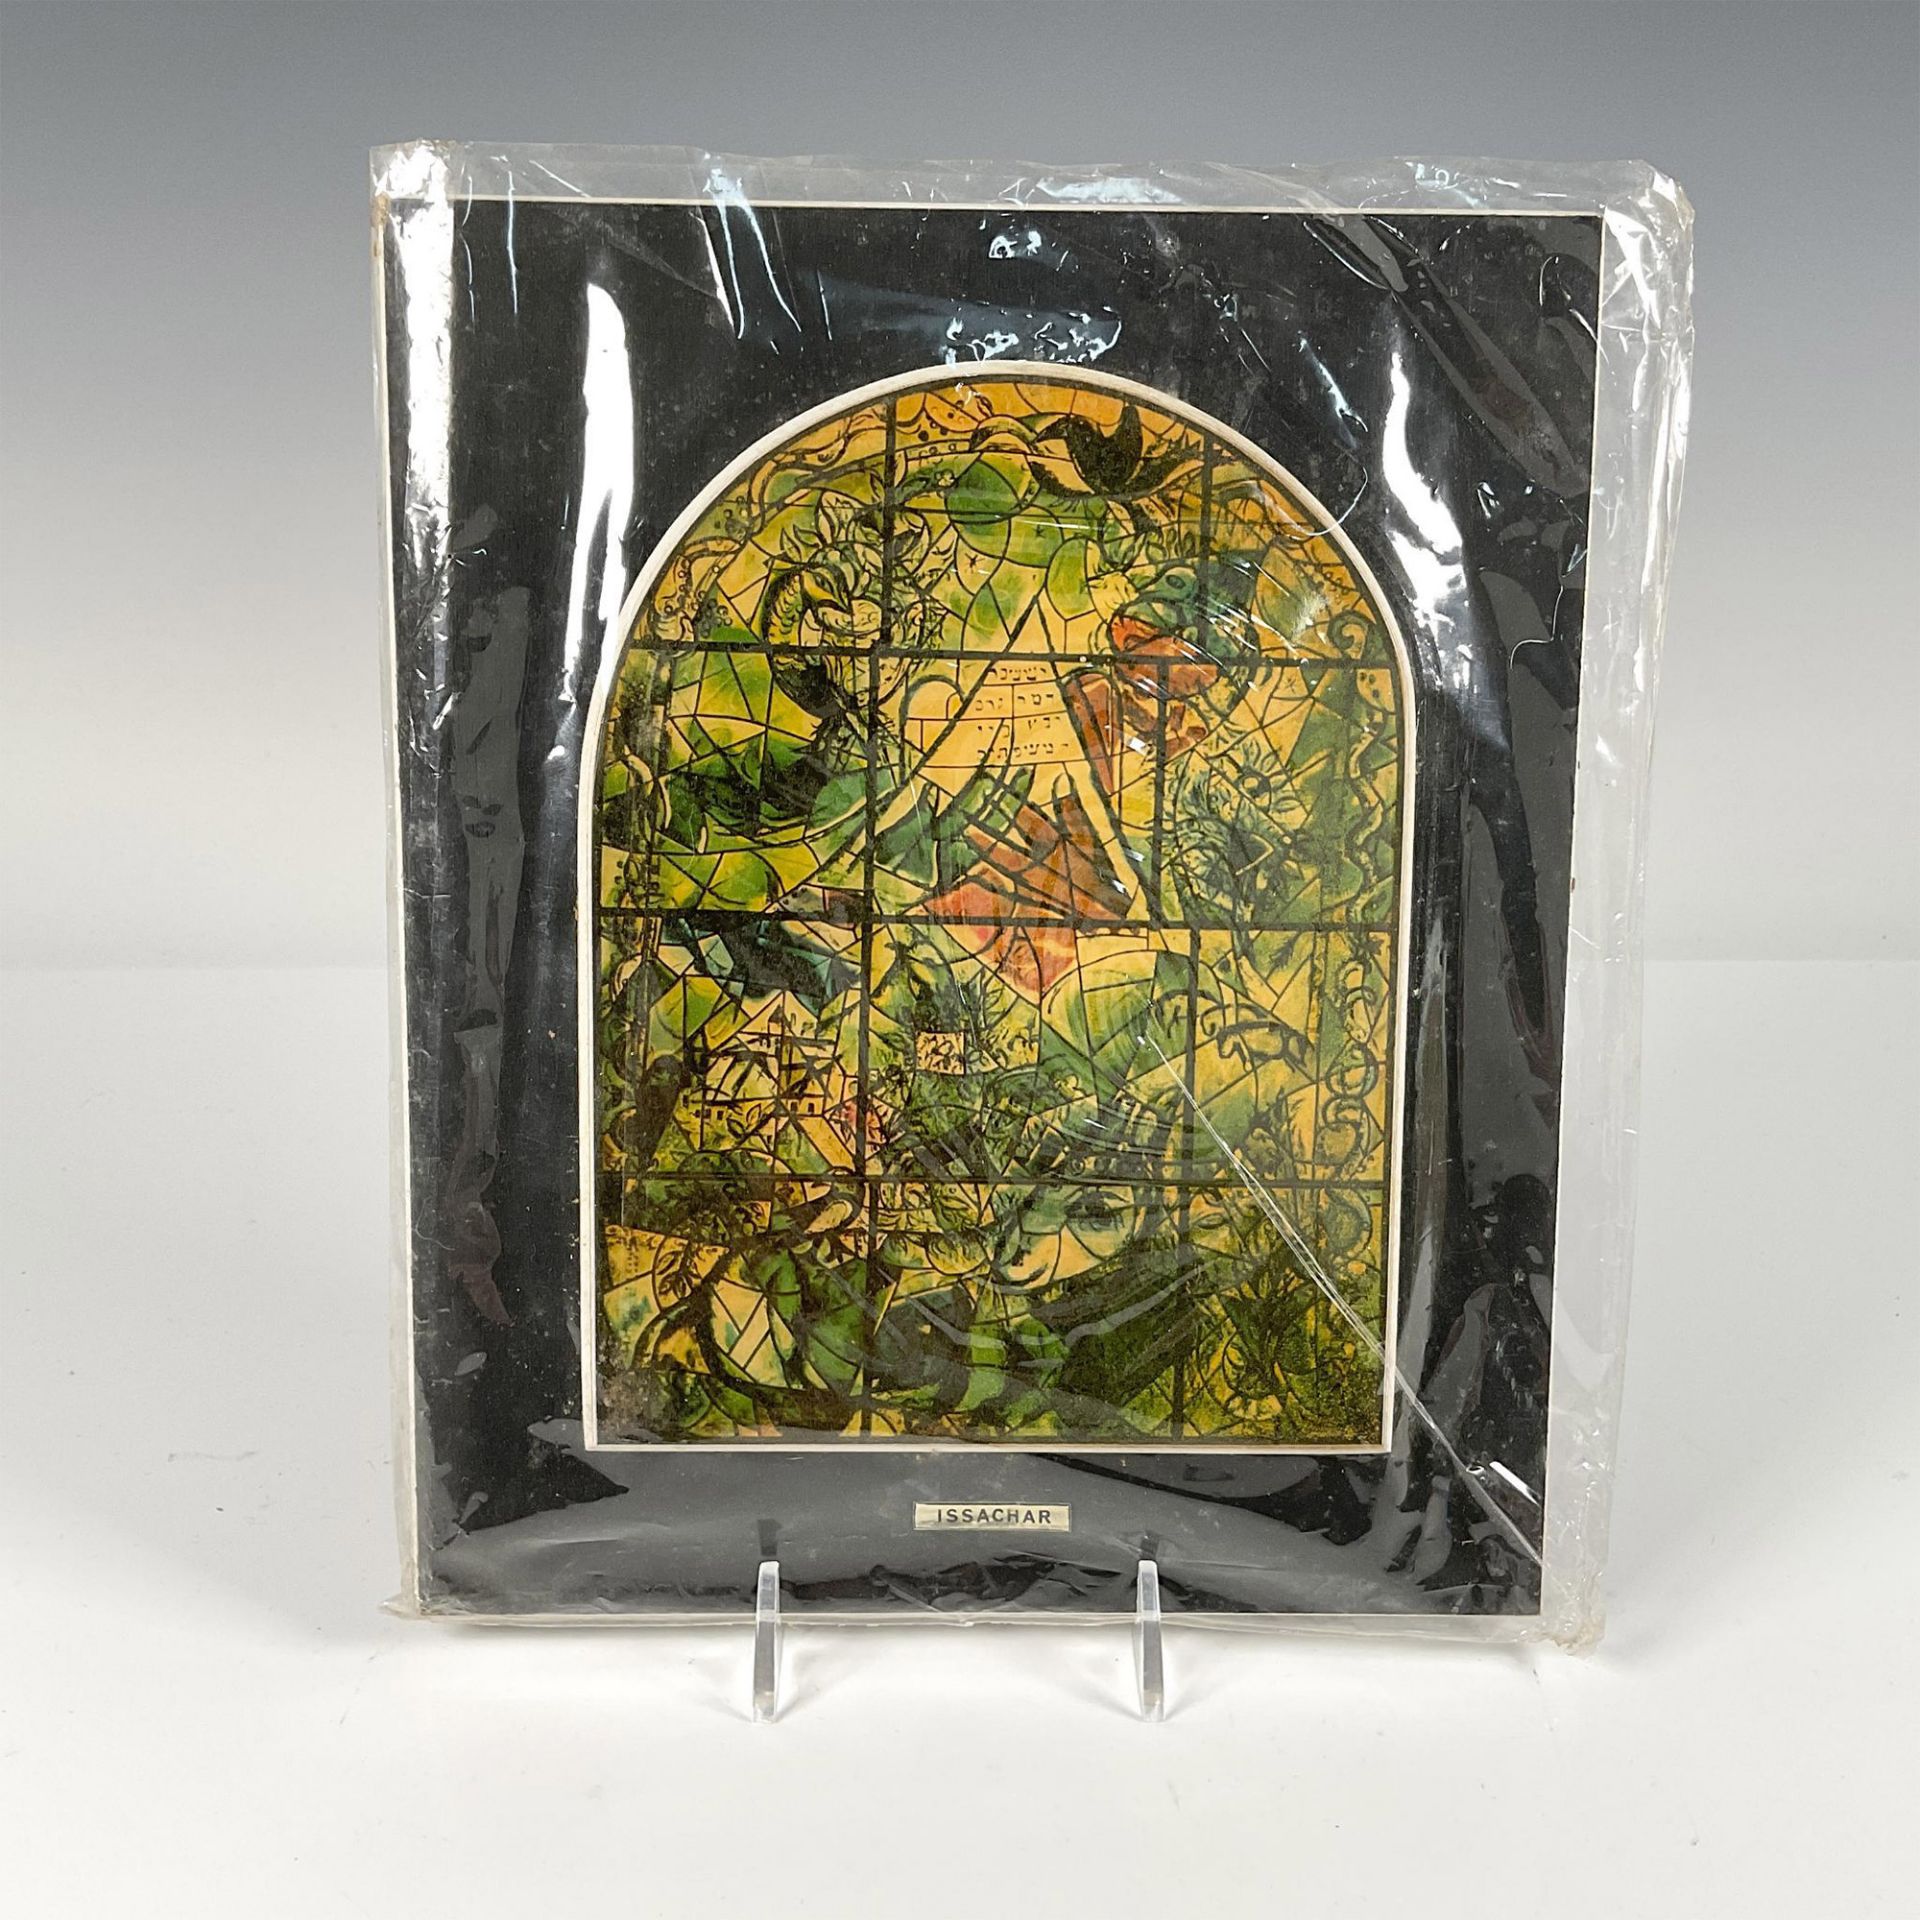 13pc After Marc Chagall by Avissar Wooden Plaques, The 12 Stained Glass Windows - Bild 13 aus 20